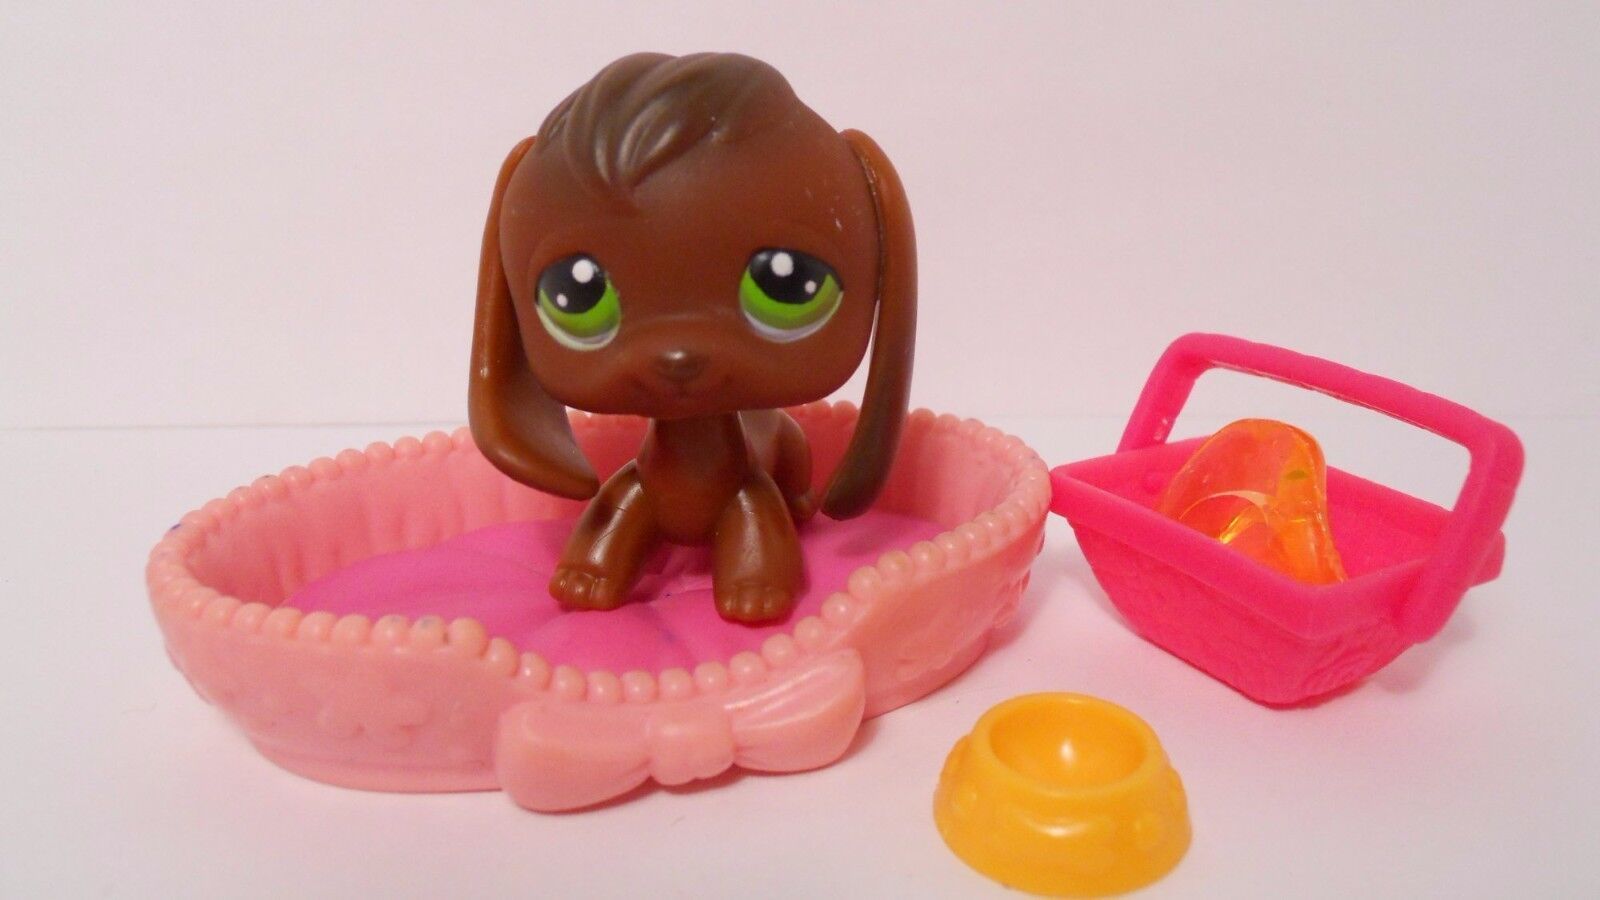 LPS # 77 Littlest Pet Shop Chocolate Beagle Puppy Dog Green Eyes with Accessorie - $46.73